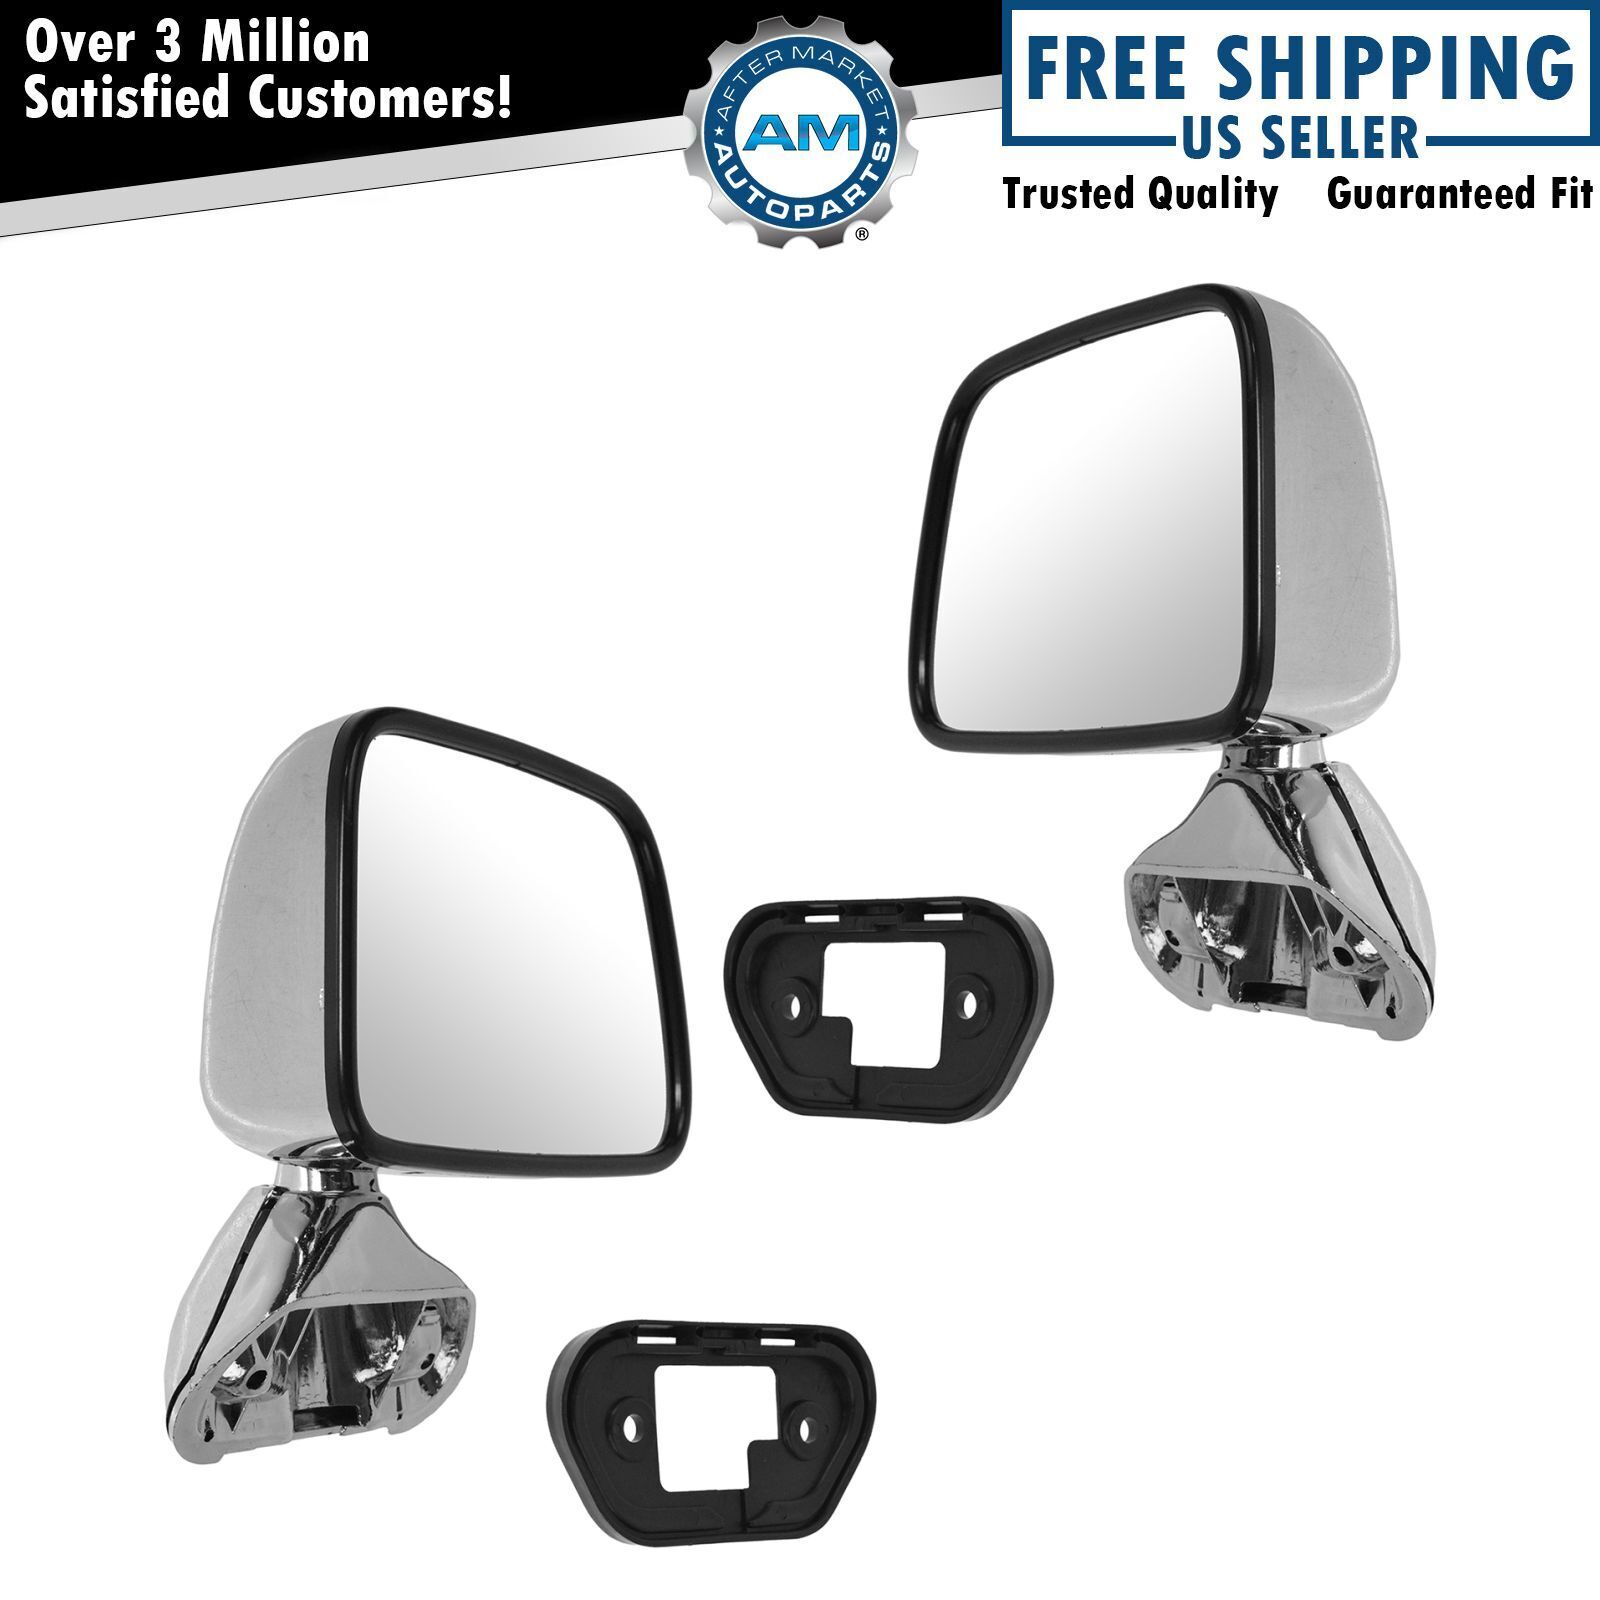 Manual Side View Mirrors Chrome Pair Set for 87-88 Toyota Pickup Truck 4Runner